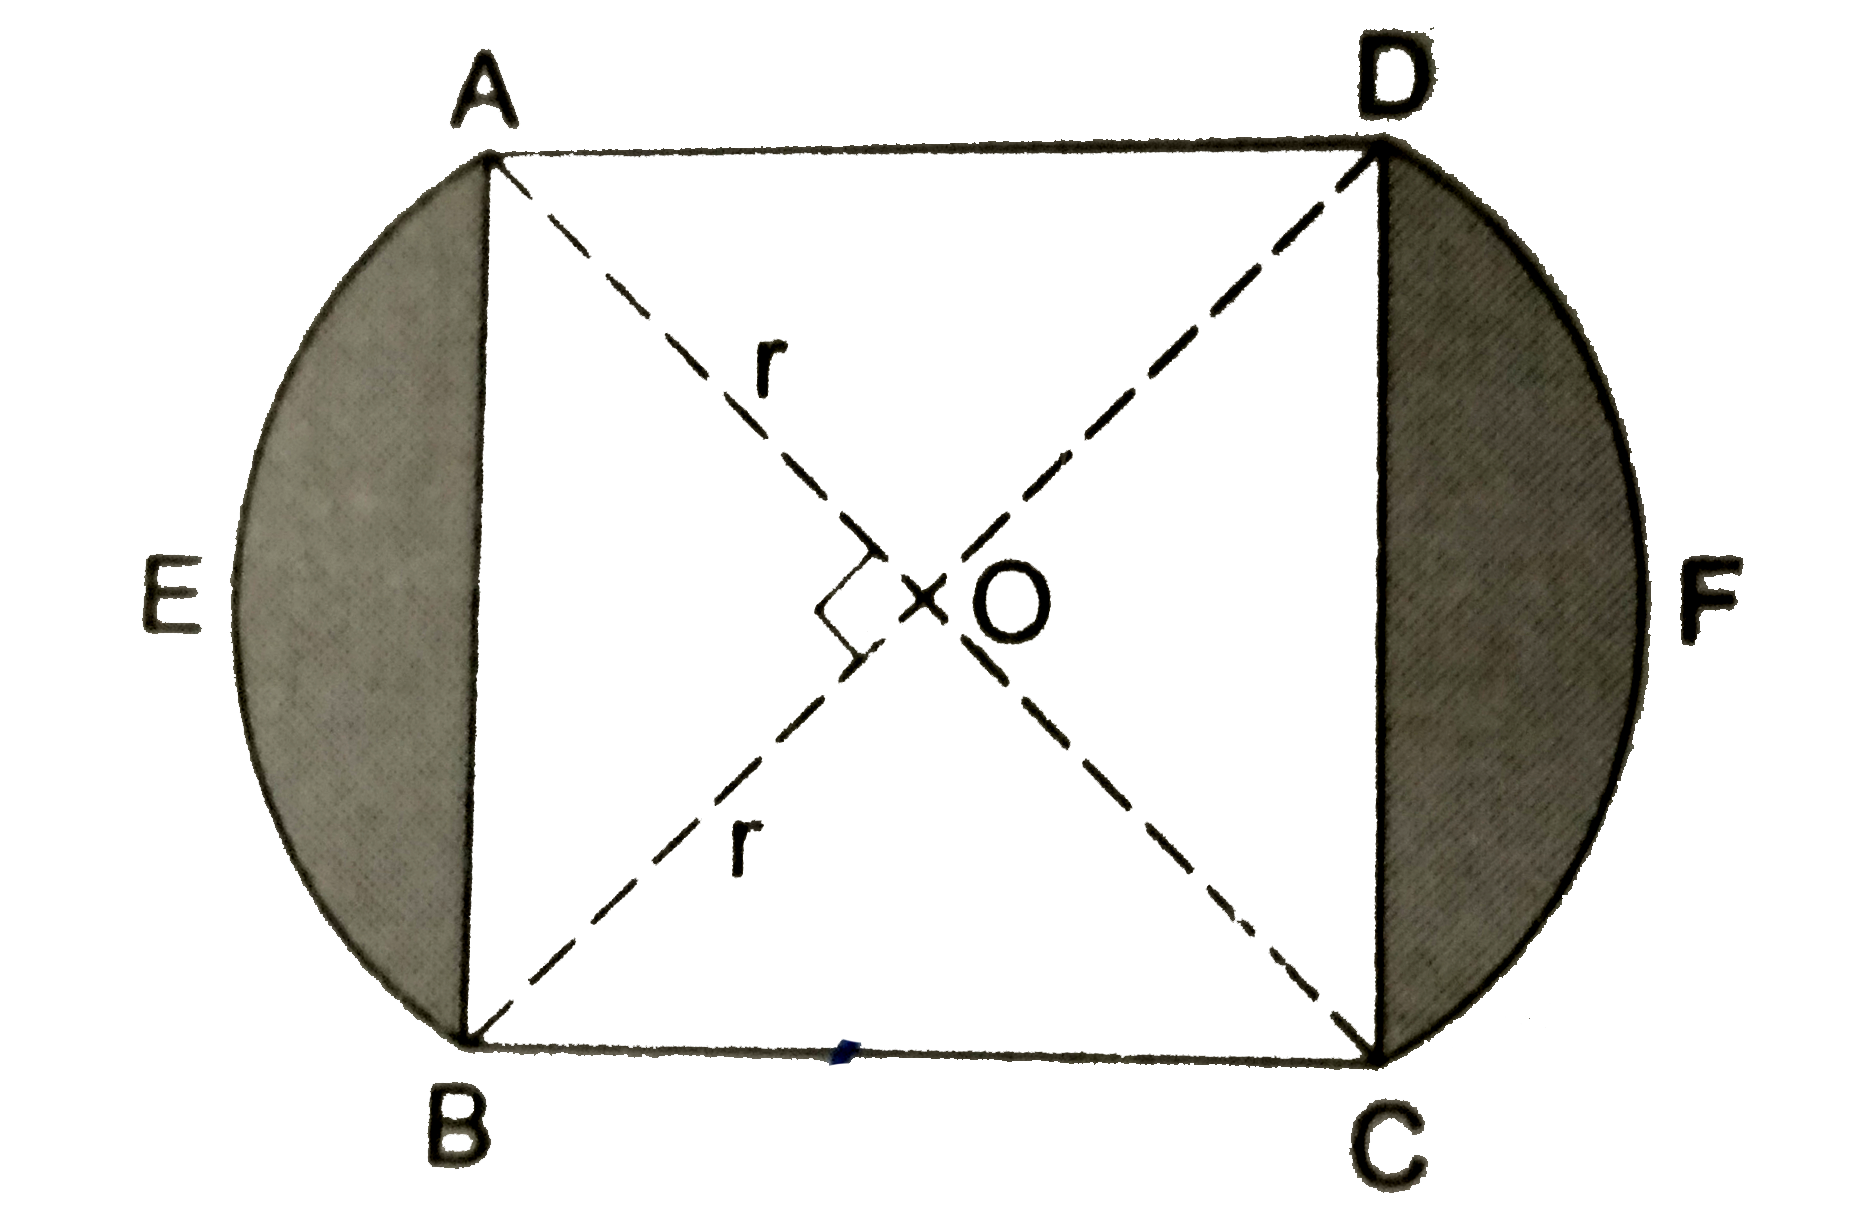 In the given figure, two circular flower beds have been shown on two sides of a square lawn ABCD of side AB=42m. If the centre of each circular flower bed is the point of intersection O of the diagonals of the square lawn, find    (i) the sum of the areas of the lawn and flower beds,   (ii) the sum of the areas of two flower beds.